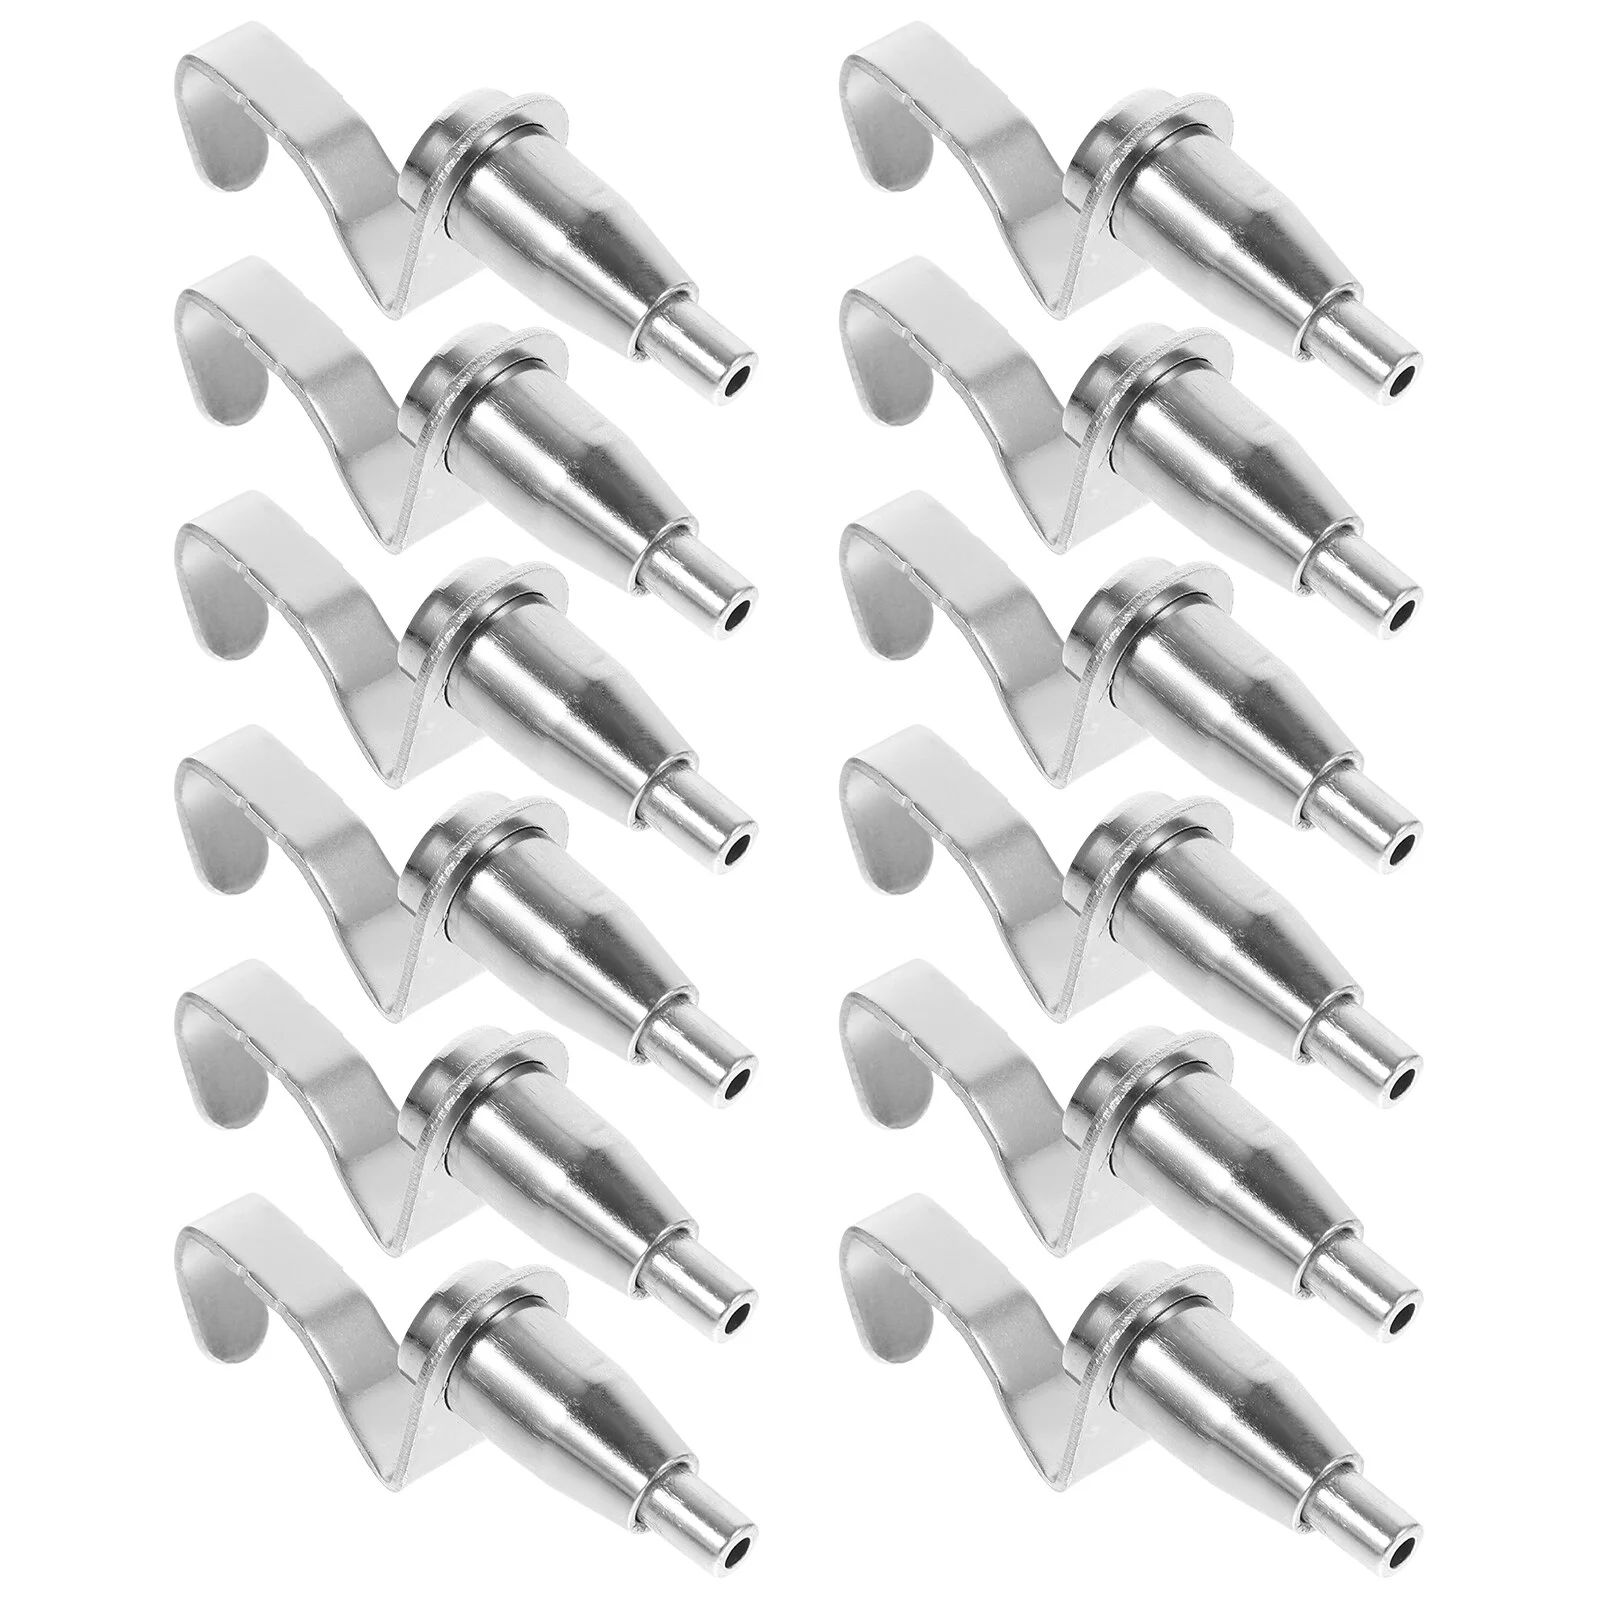 

12Pcs Adjustable Metal Gallery Display Metal Clothes Hangers Picture Rail Hooks Hanger System Accessories for Wire Rope